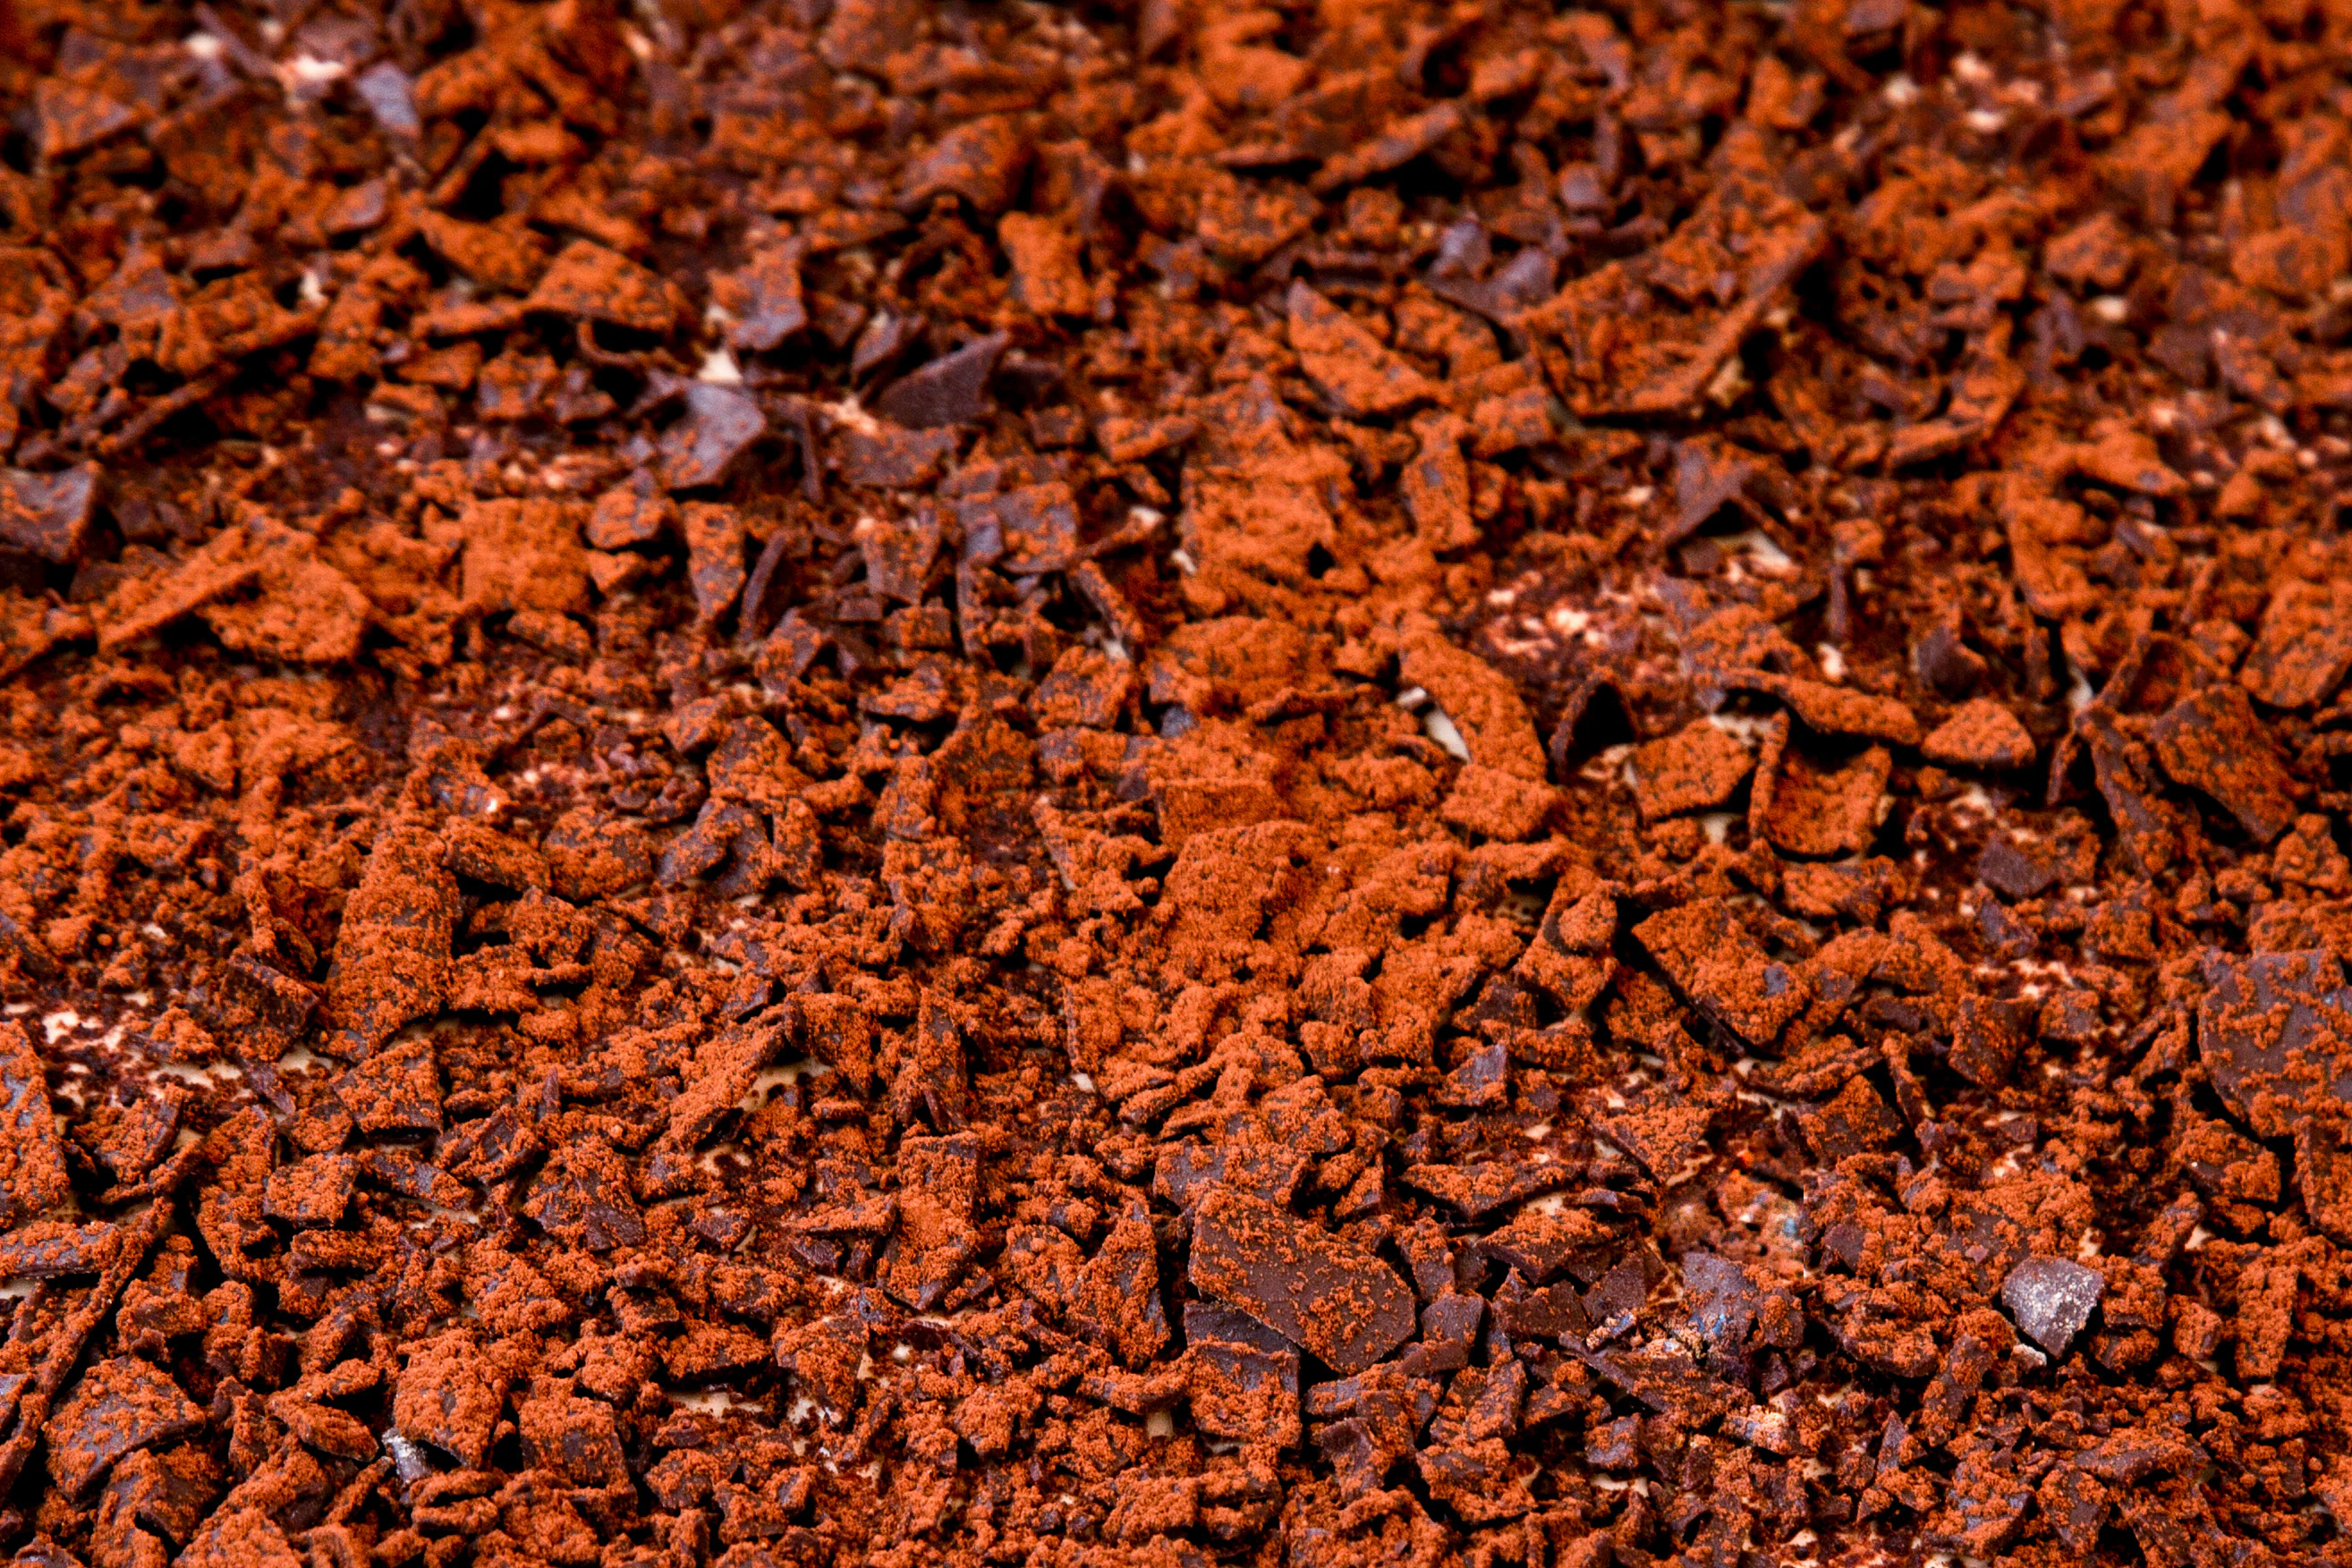 Shards of chocolate with a dusting of cocoa powder.